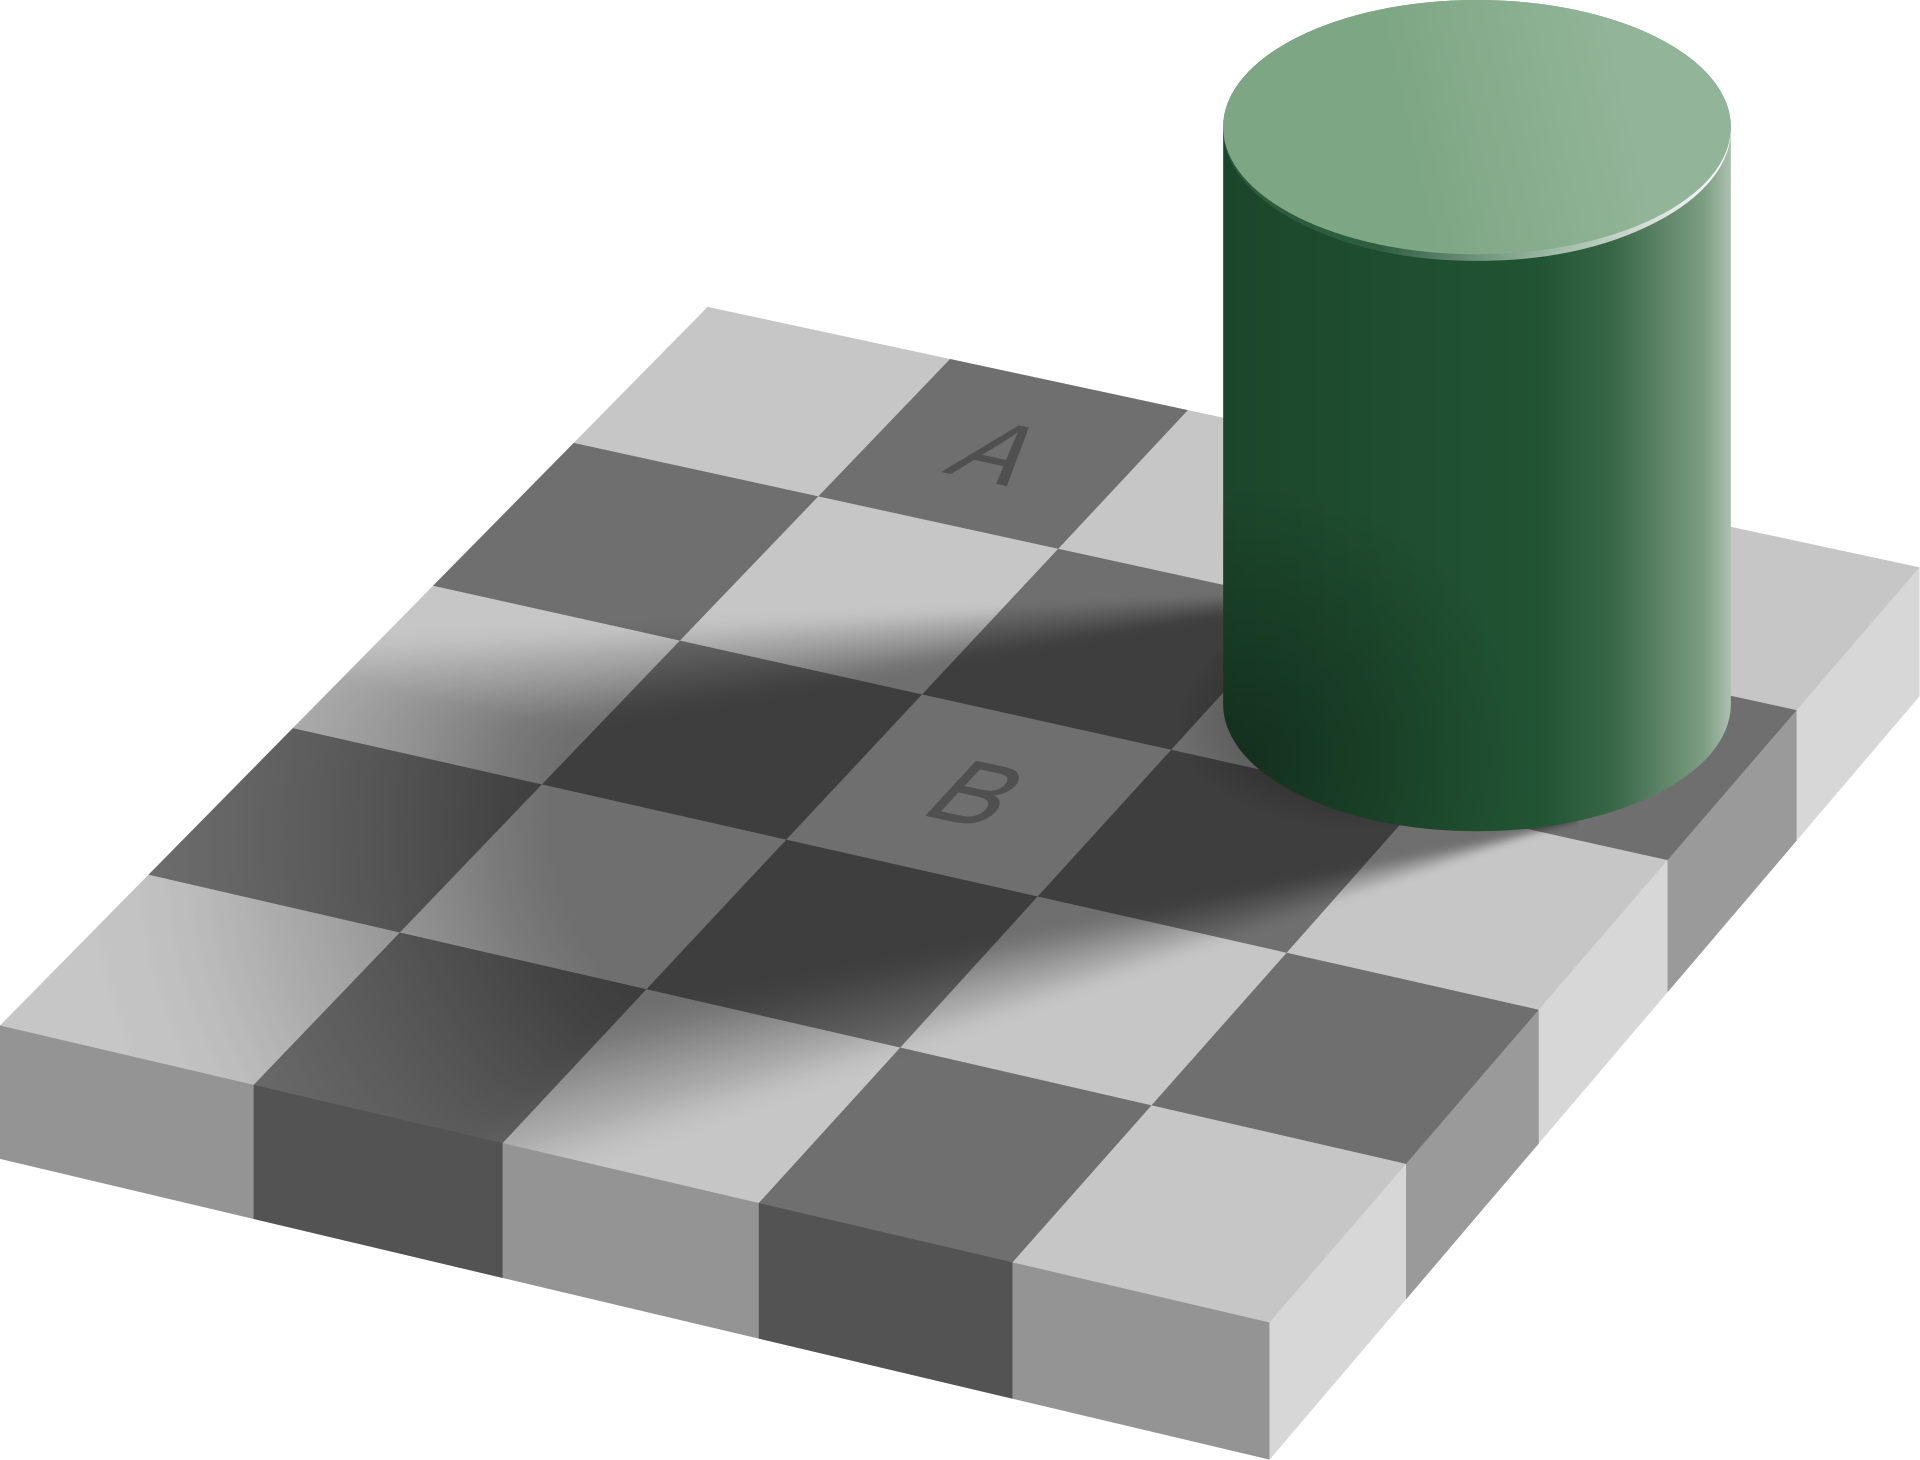 An optical illusion of a checkerboard